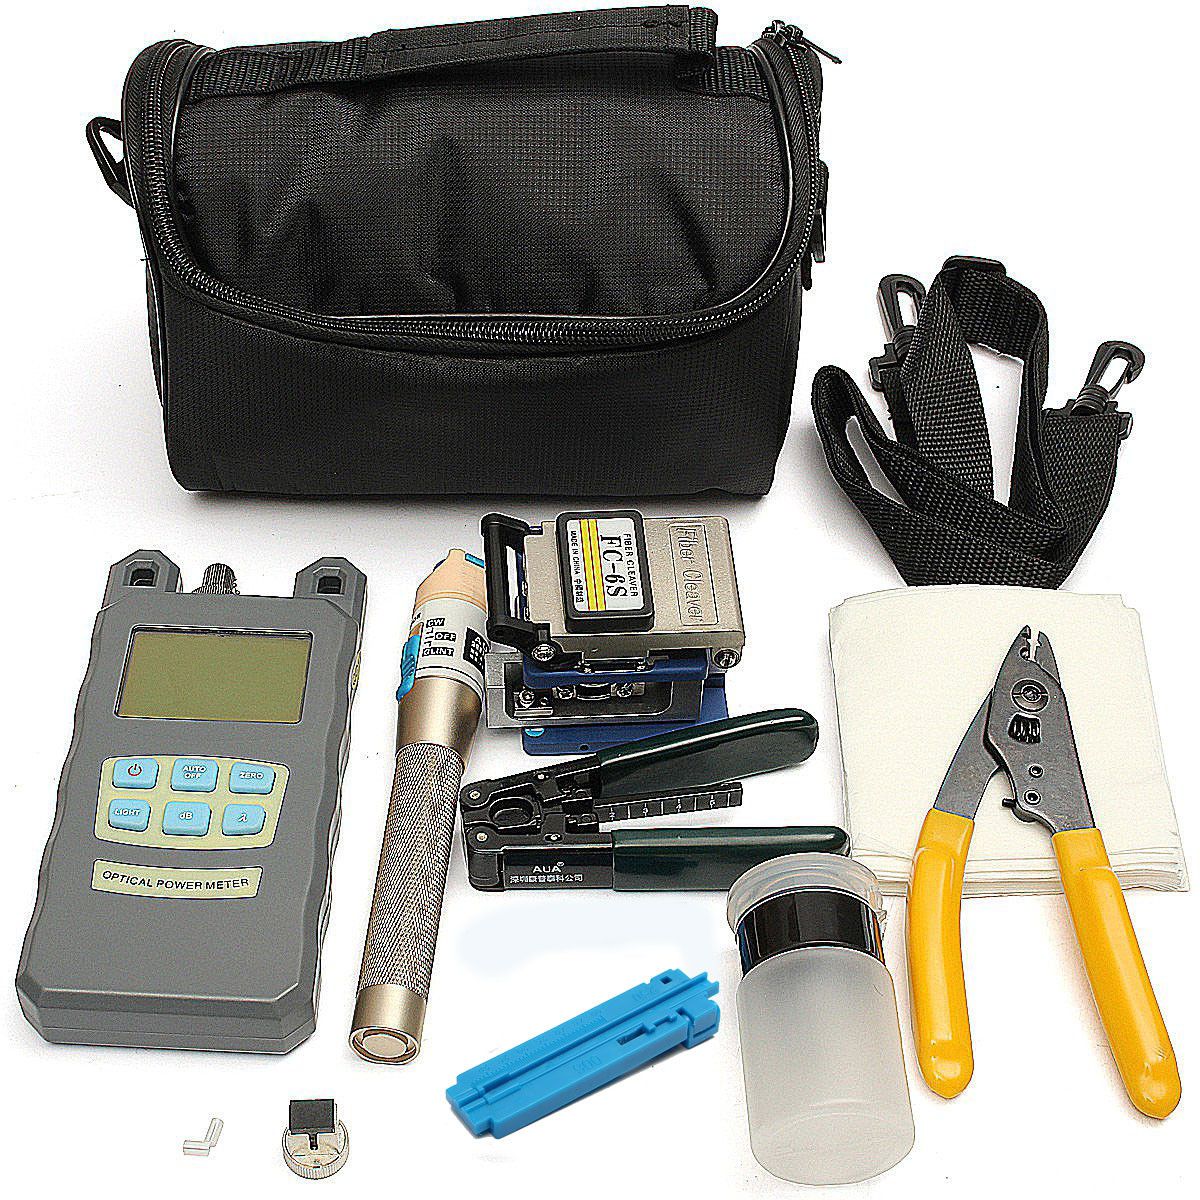 Fiber-Optic-FTTH-Tool-Kit-with-FC-6S-Fiber-Cleaver-and-Optical-Power-Meter-Set-1044440